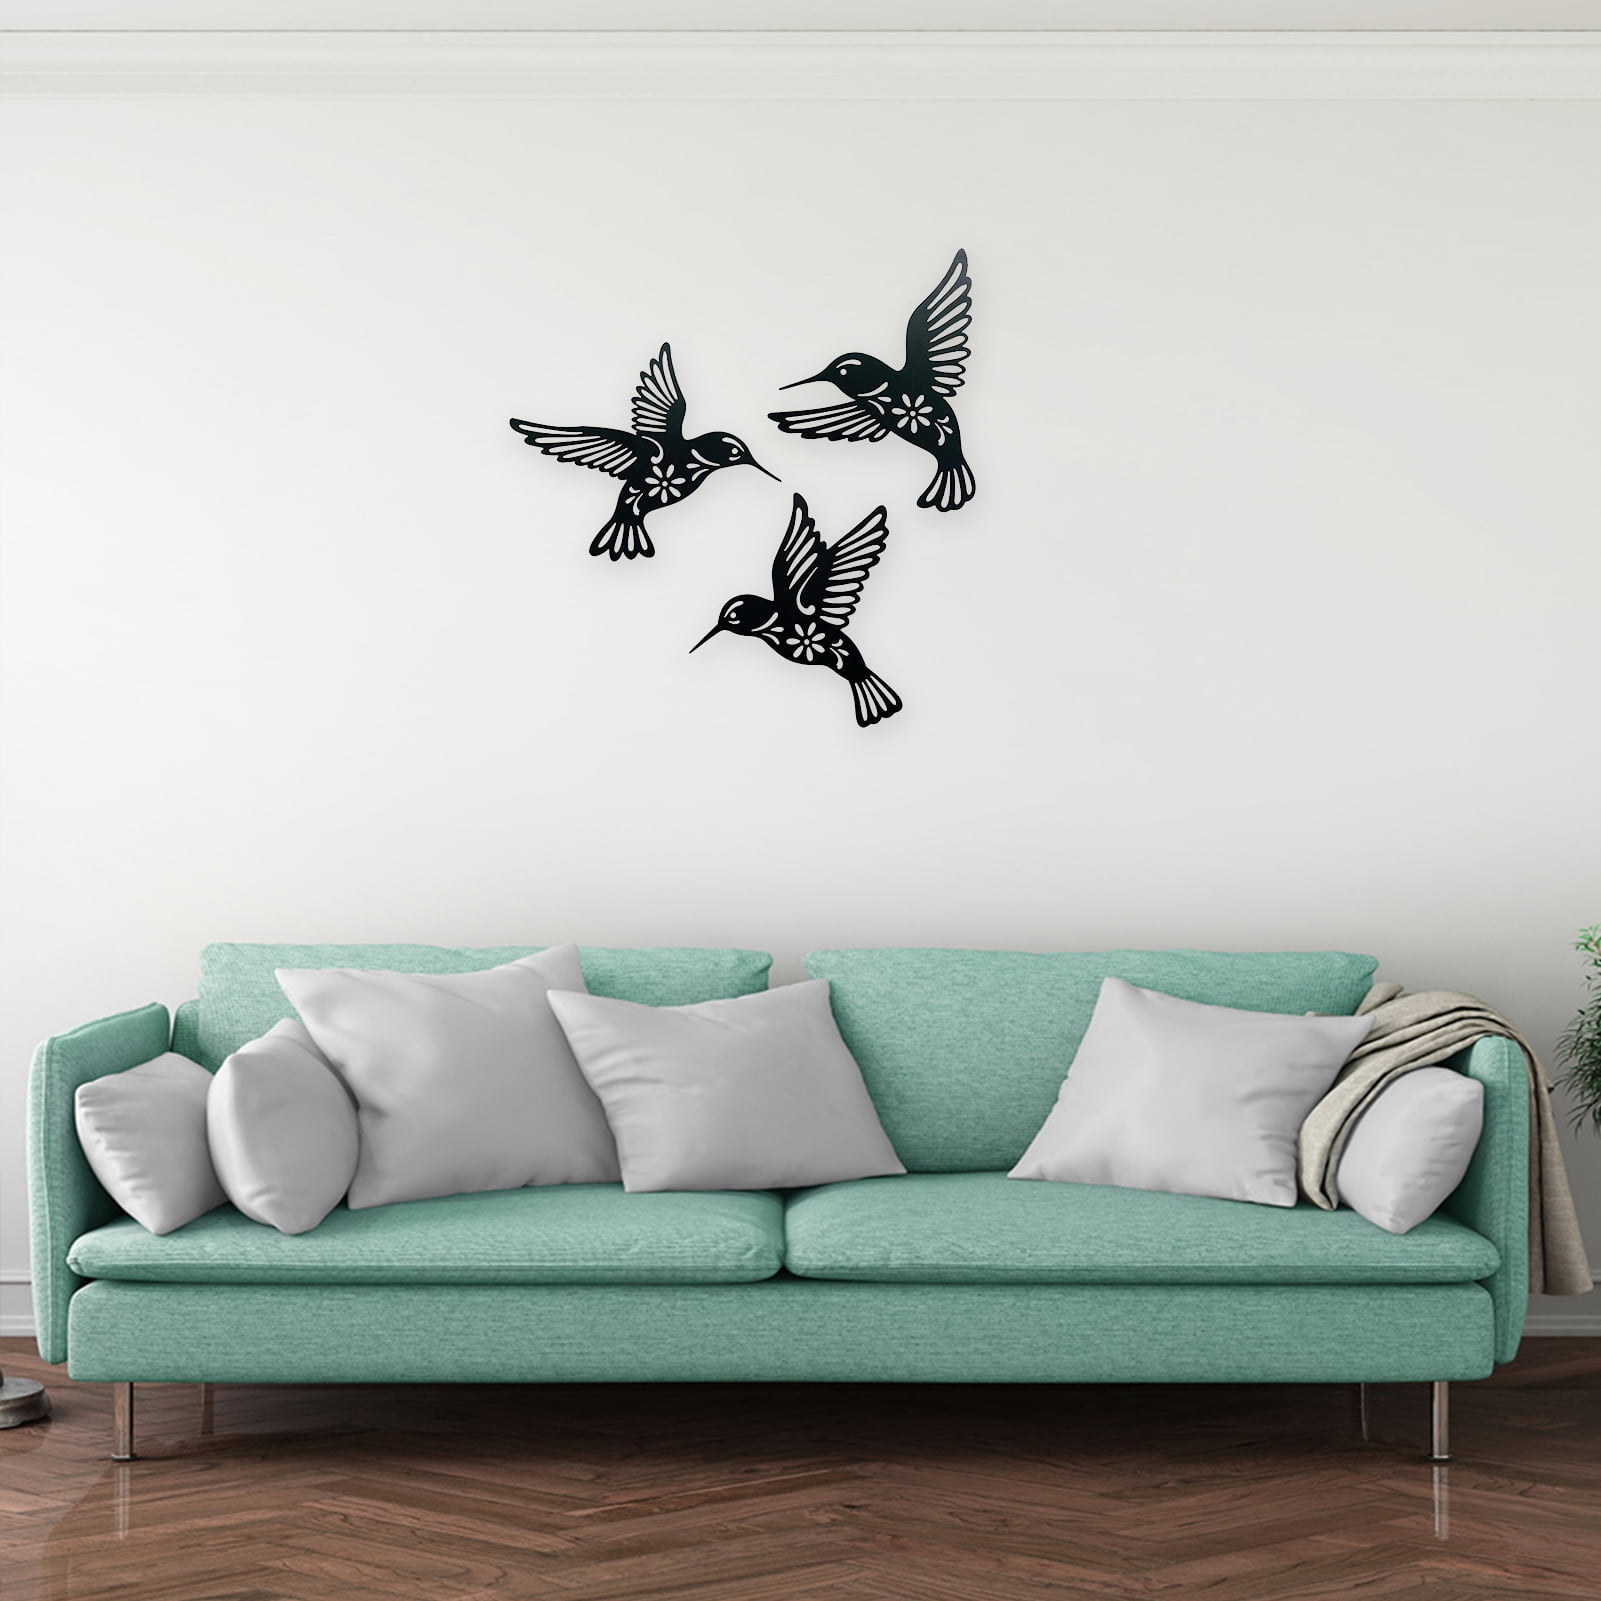 ExclusiveLane Wall Hanging for Balcony, Garden, Outdoor | Wall Hanging  Décor for Home, Office, Living Room, Bedroom | 'Feathered Sparrows'  Handmade